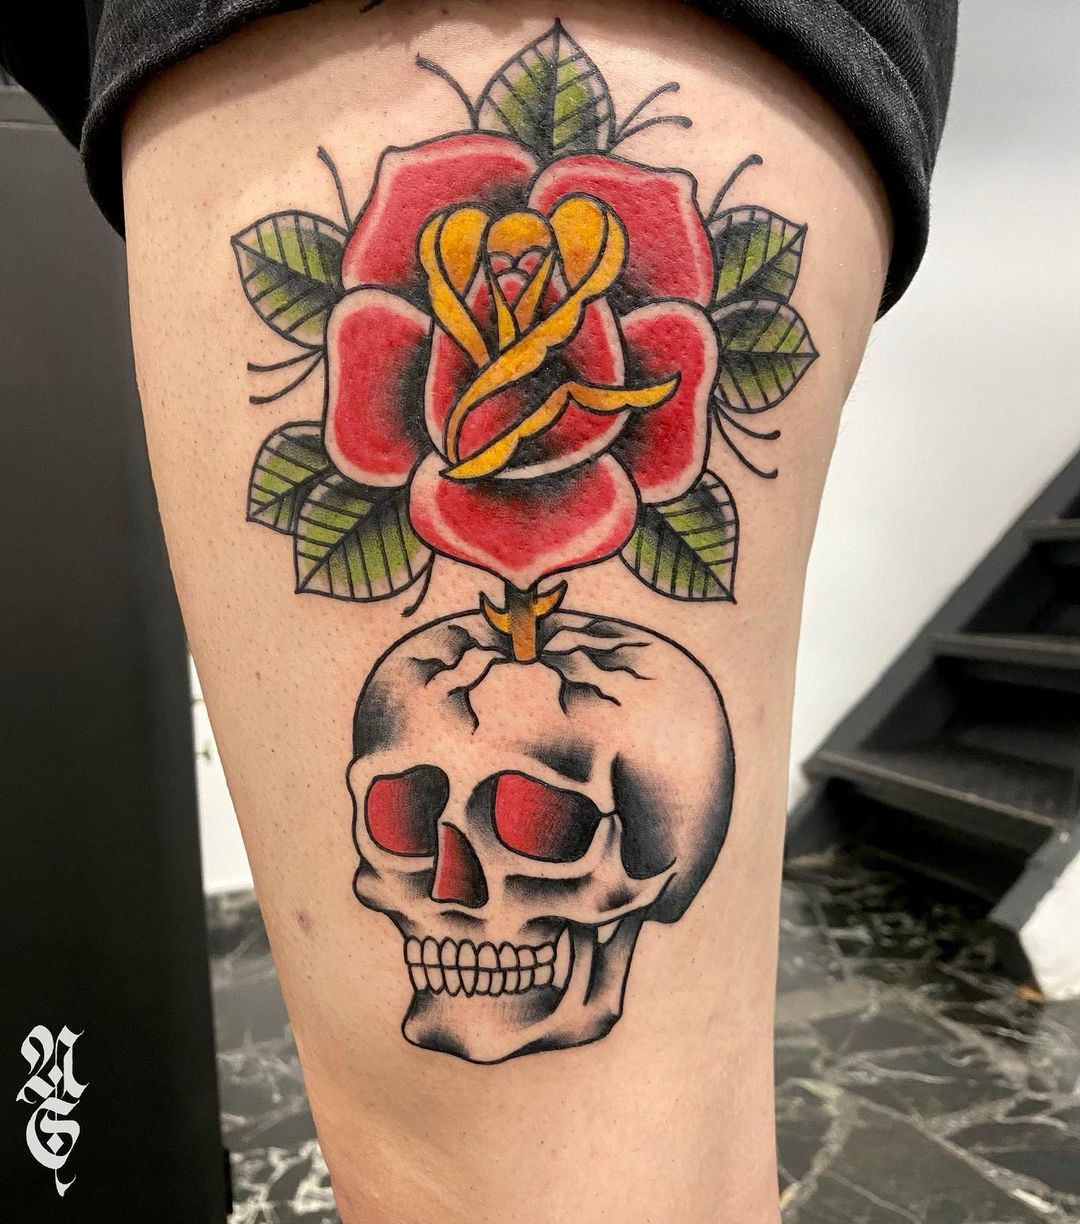  Black Skull And Red Rose Tattoo